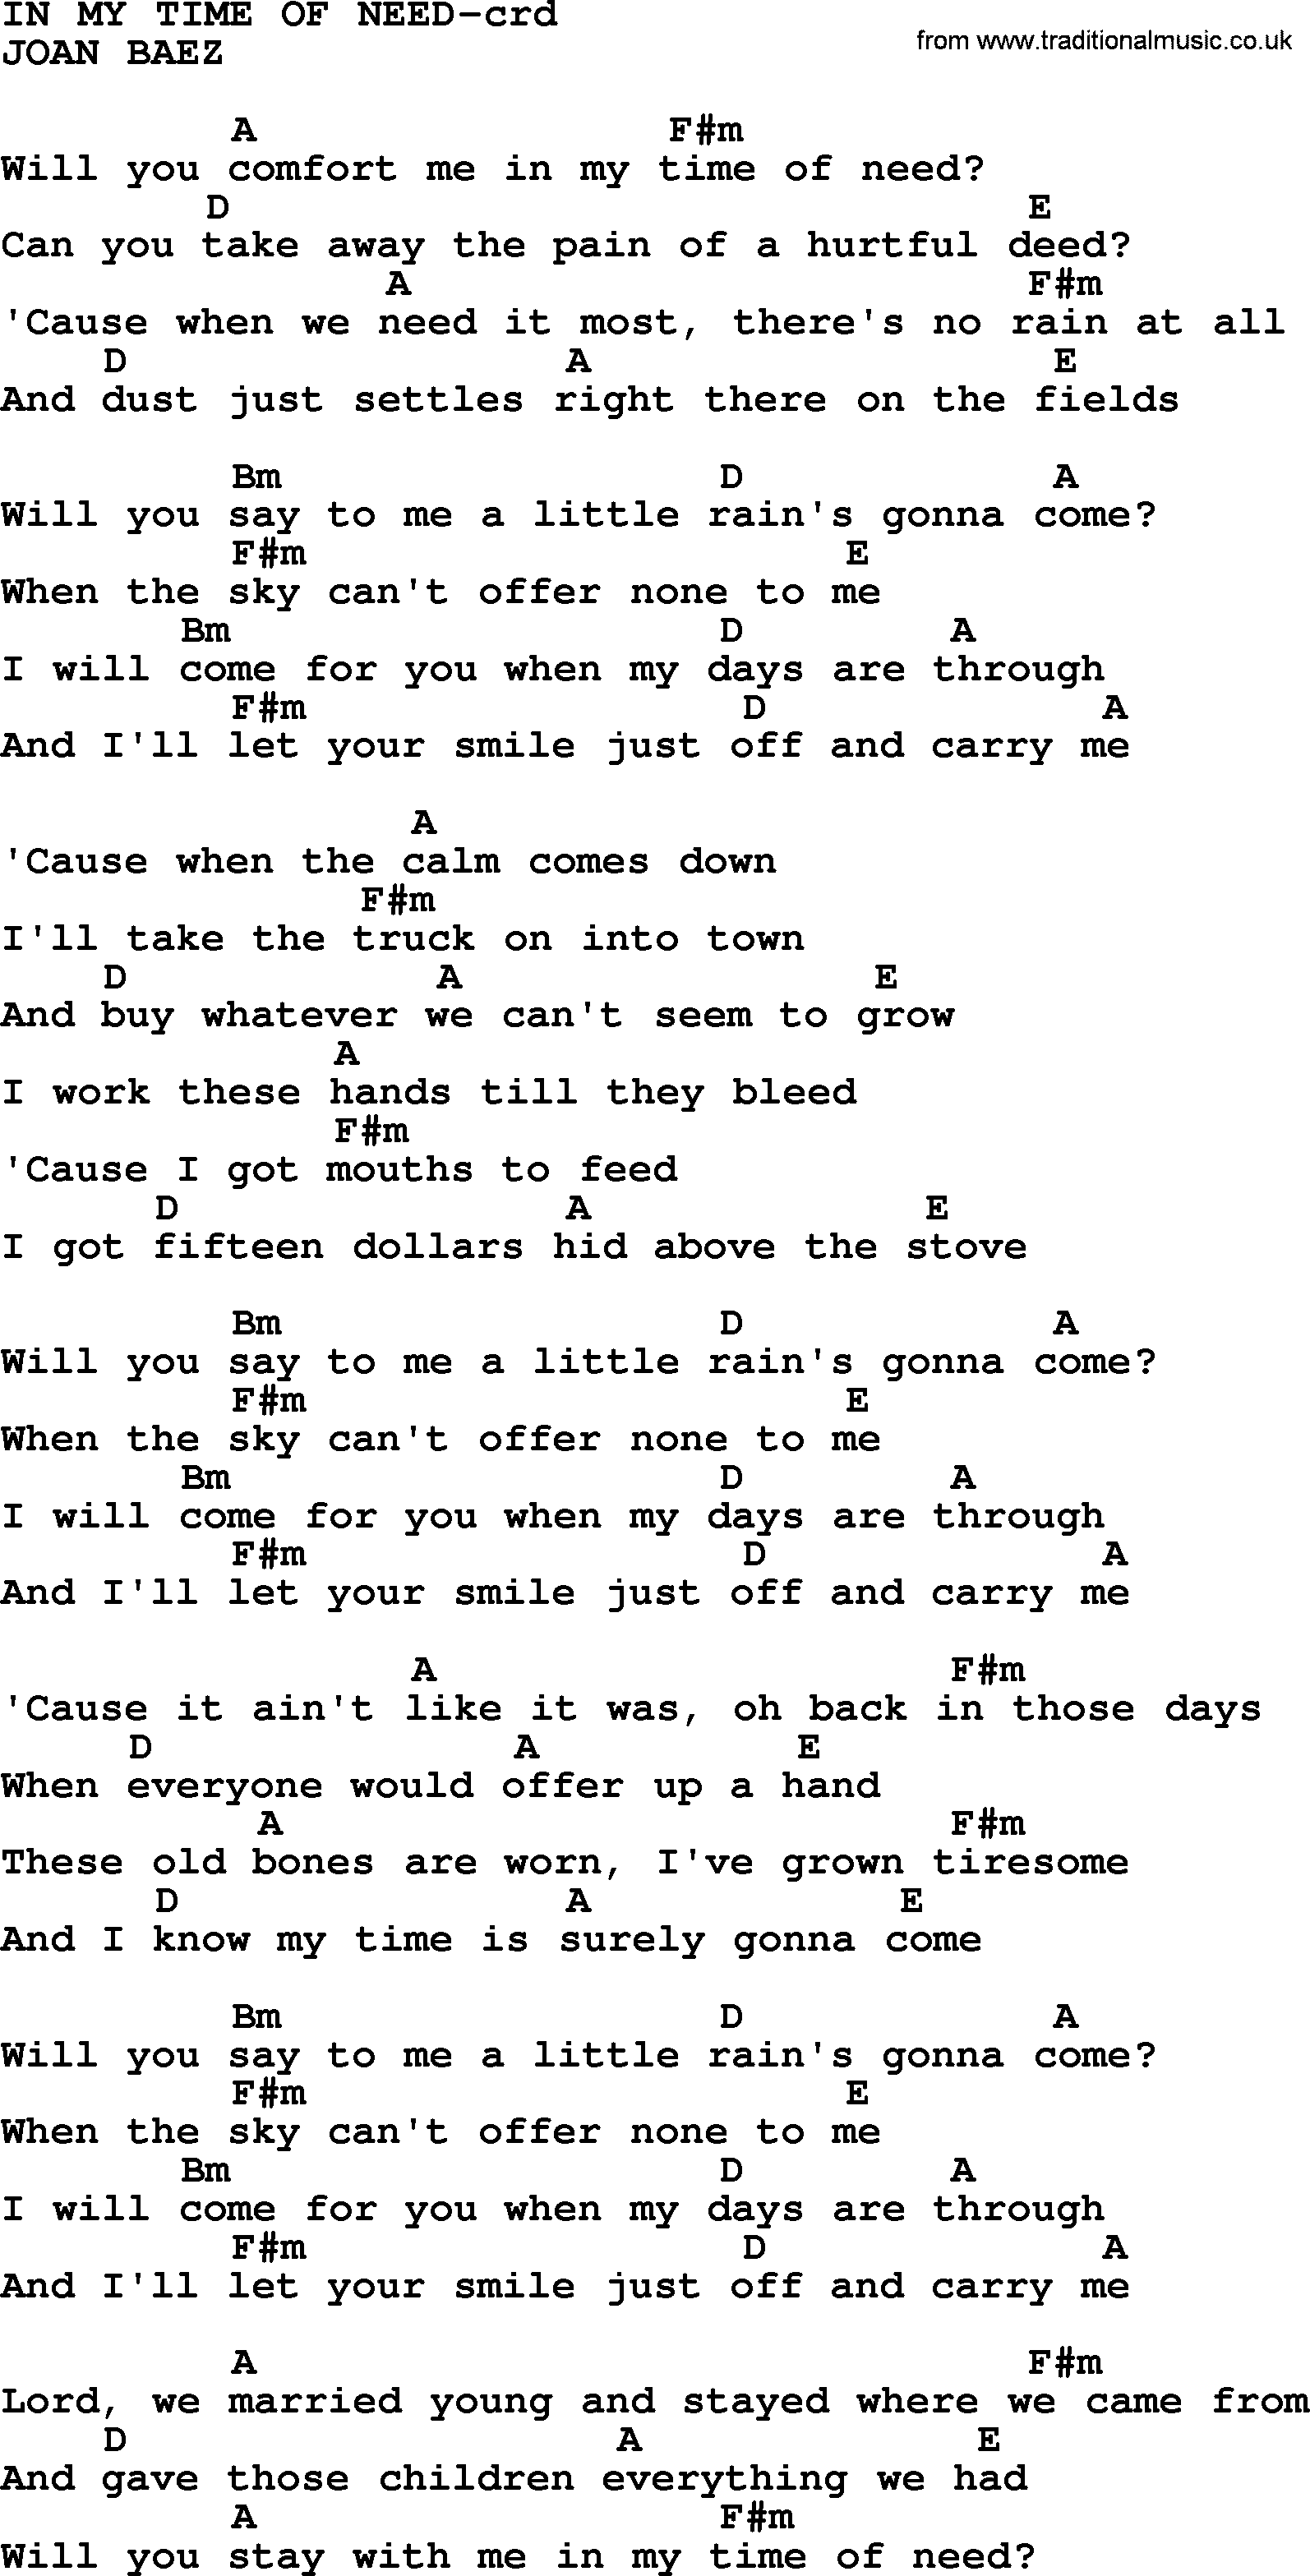 Joan Baez song In My Time Of Need lyrics and chords